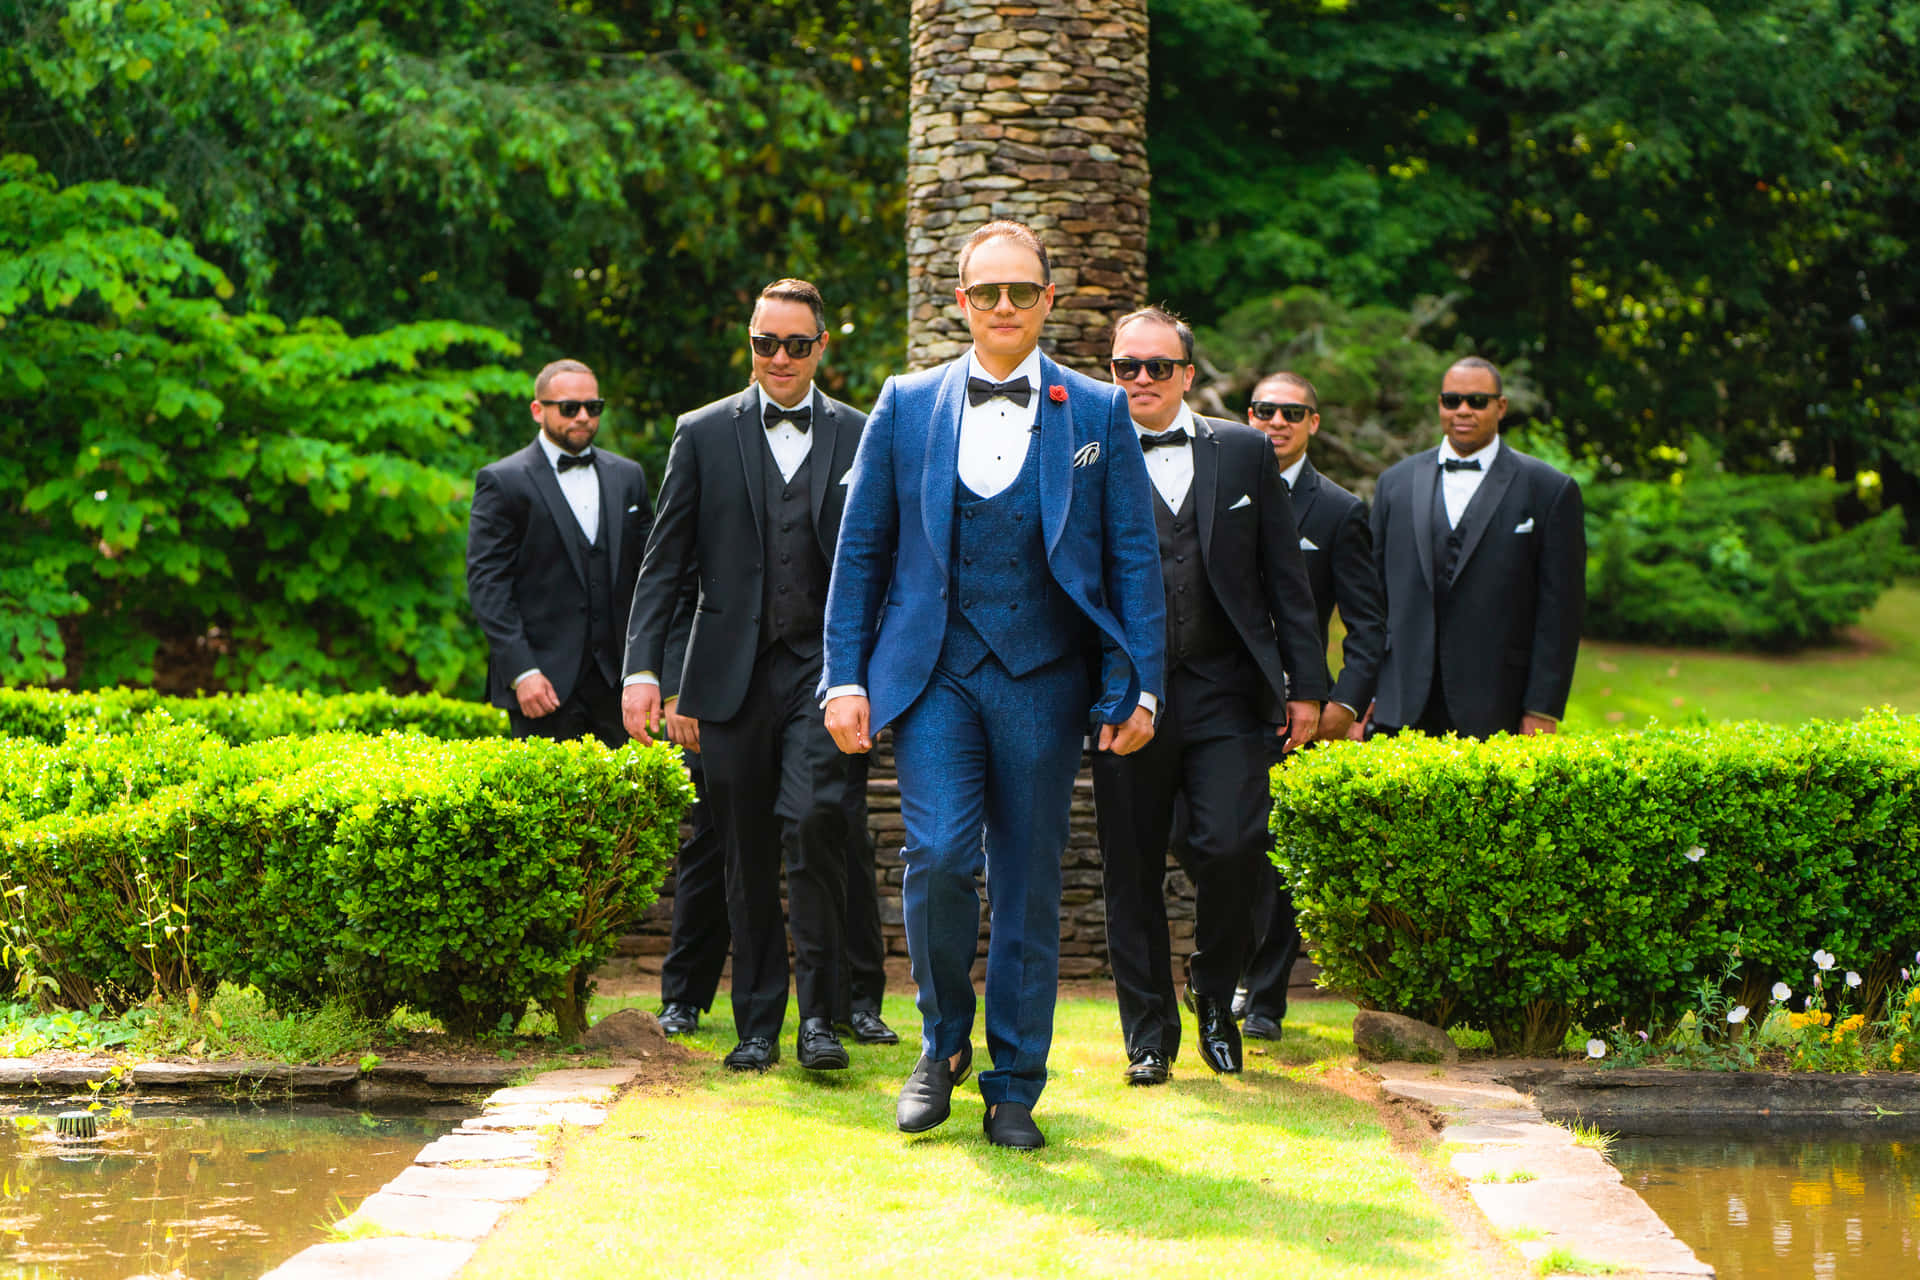 A Picture-Perfect Groomsman Moment